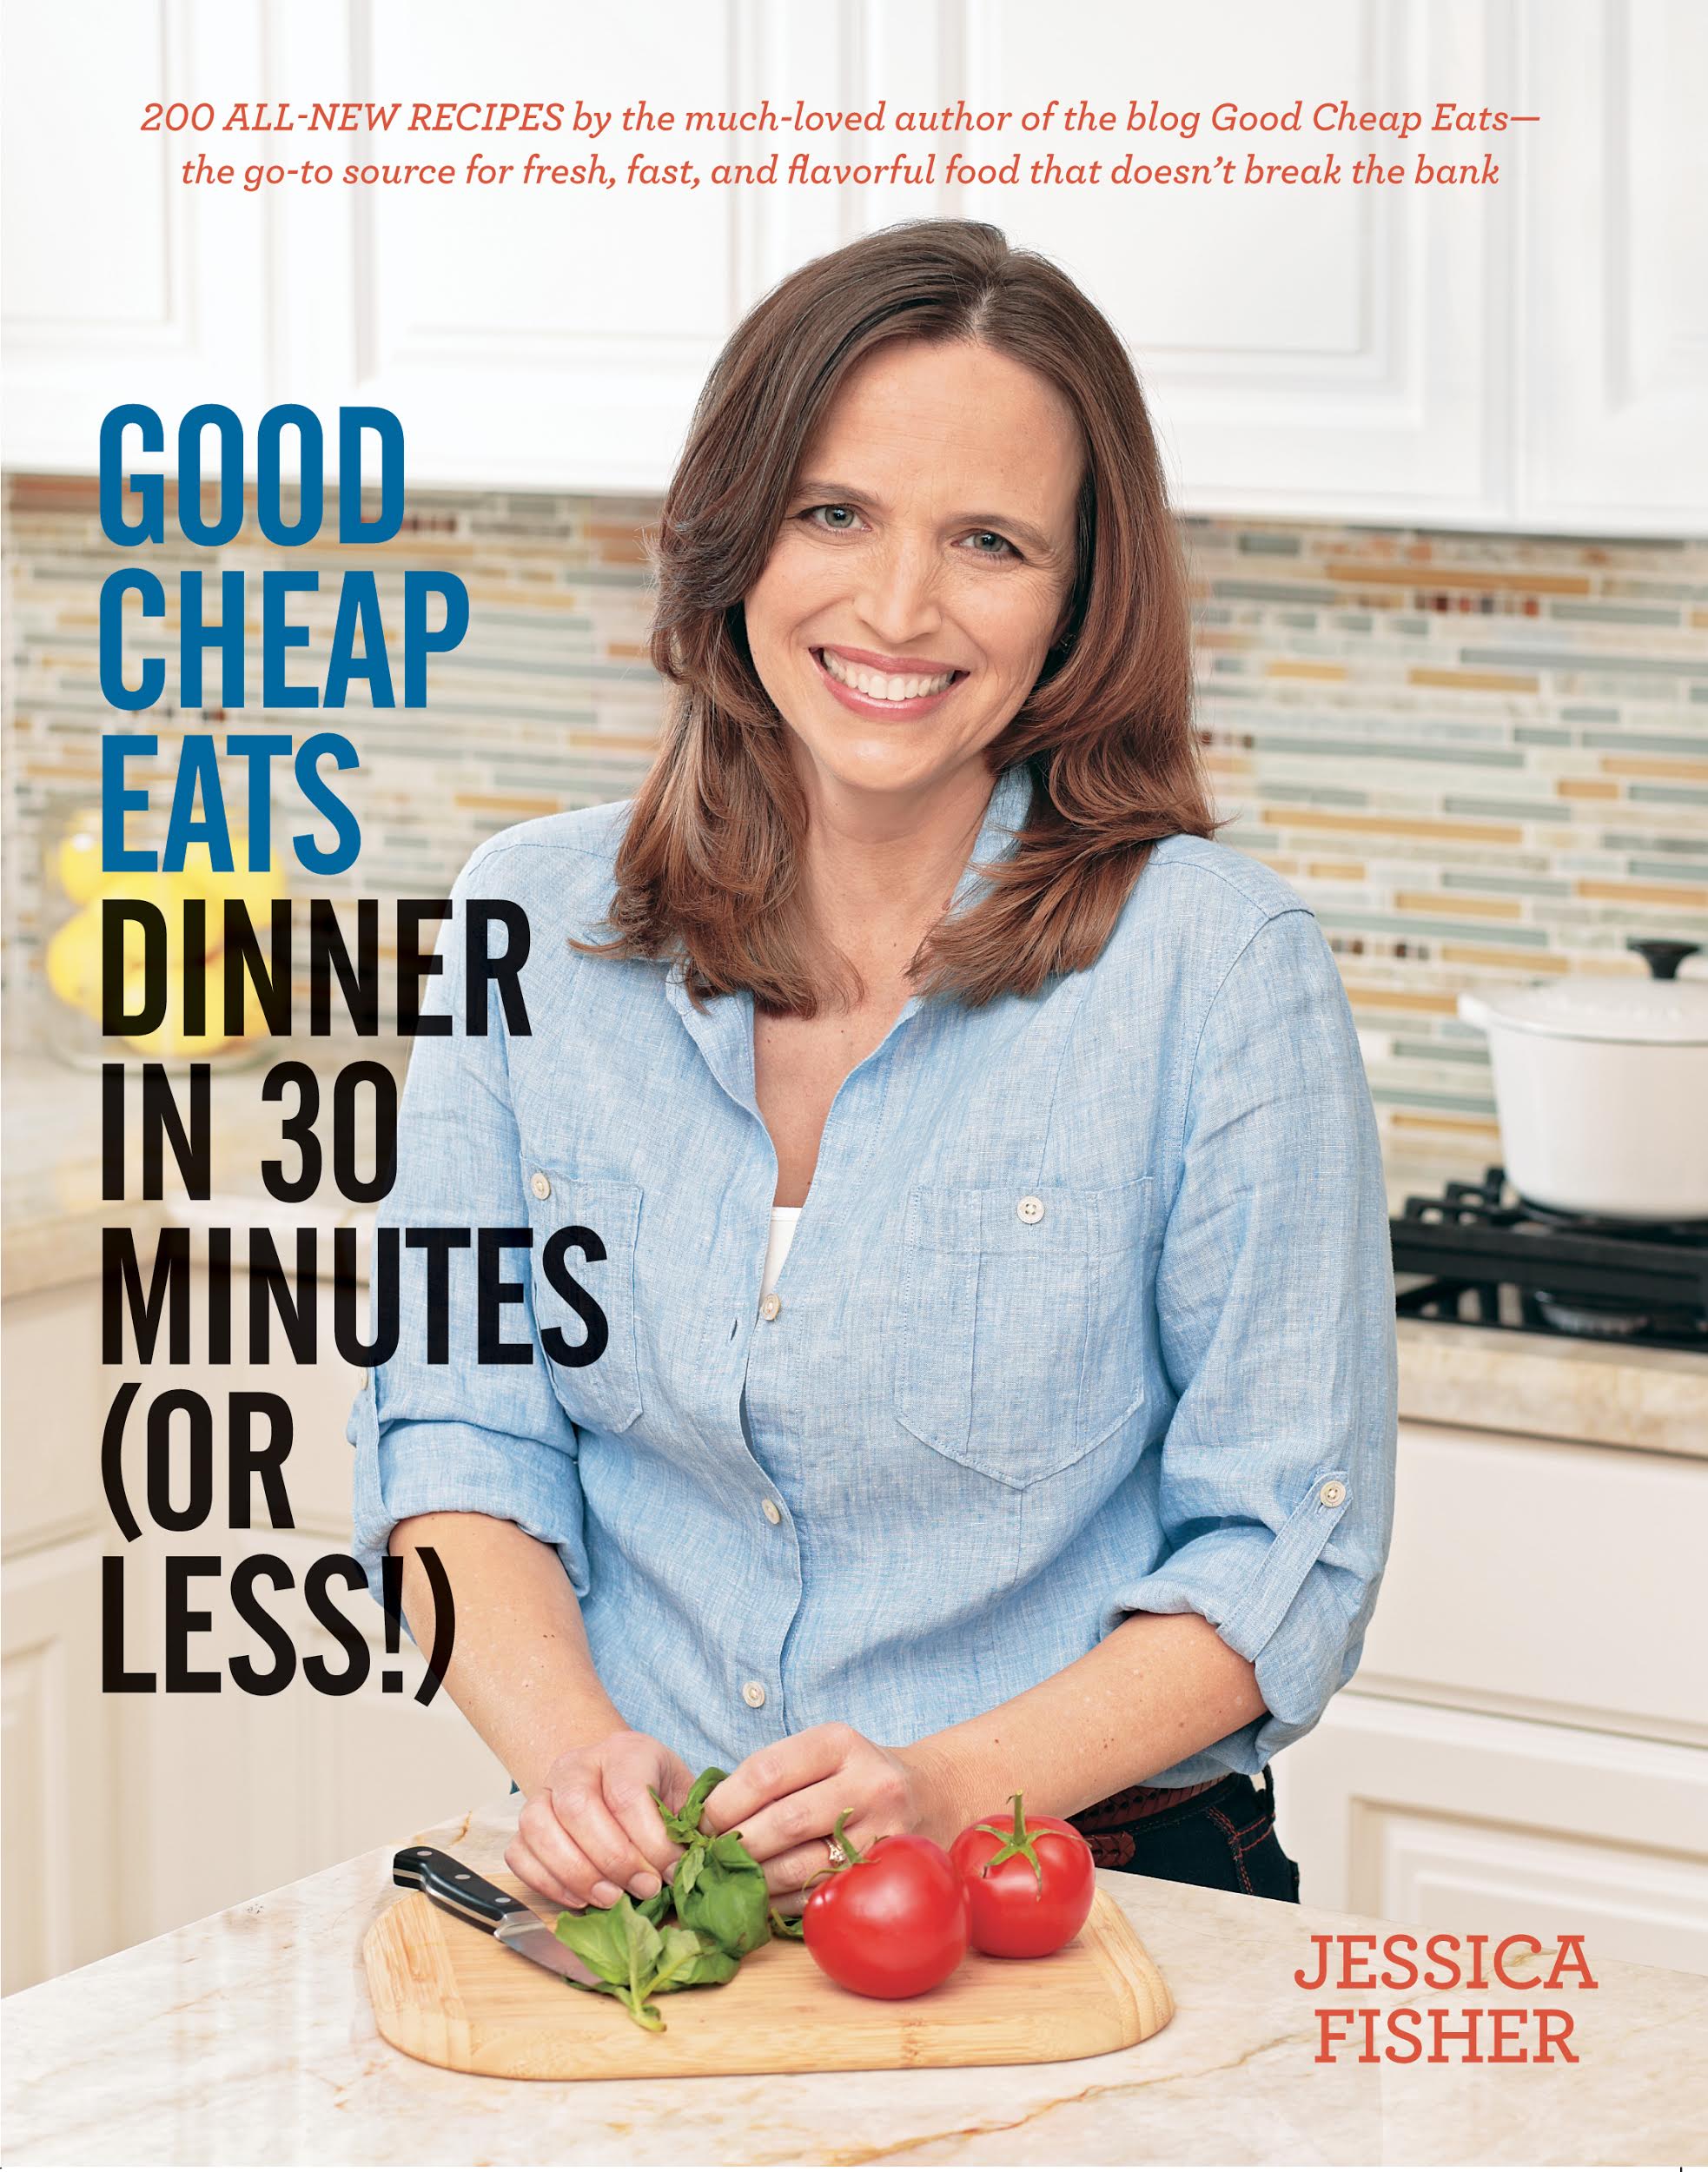 cover image of good cheap eats dinner in 30 minutes or less cookbook.